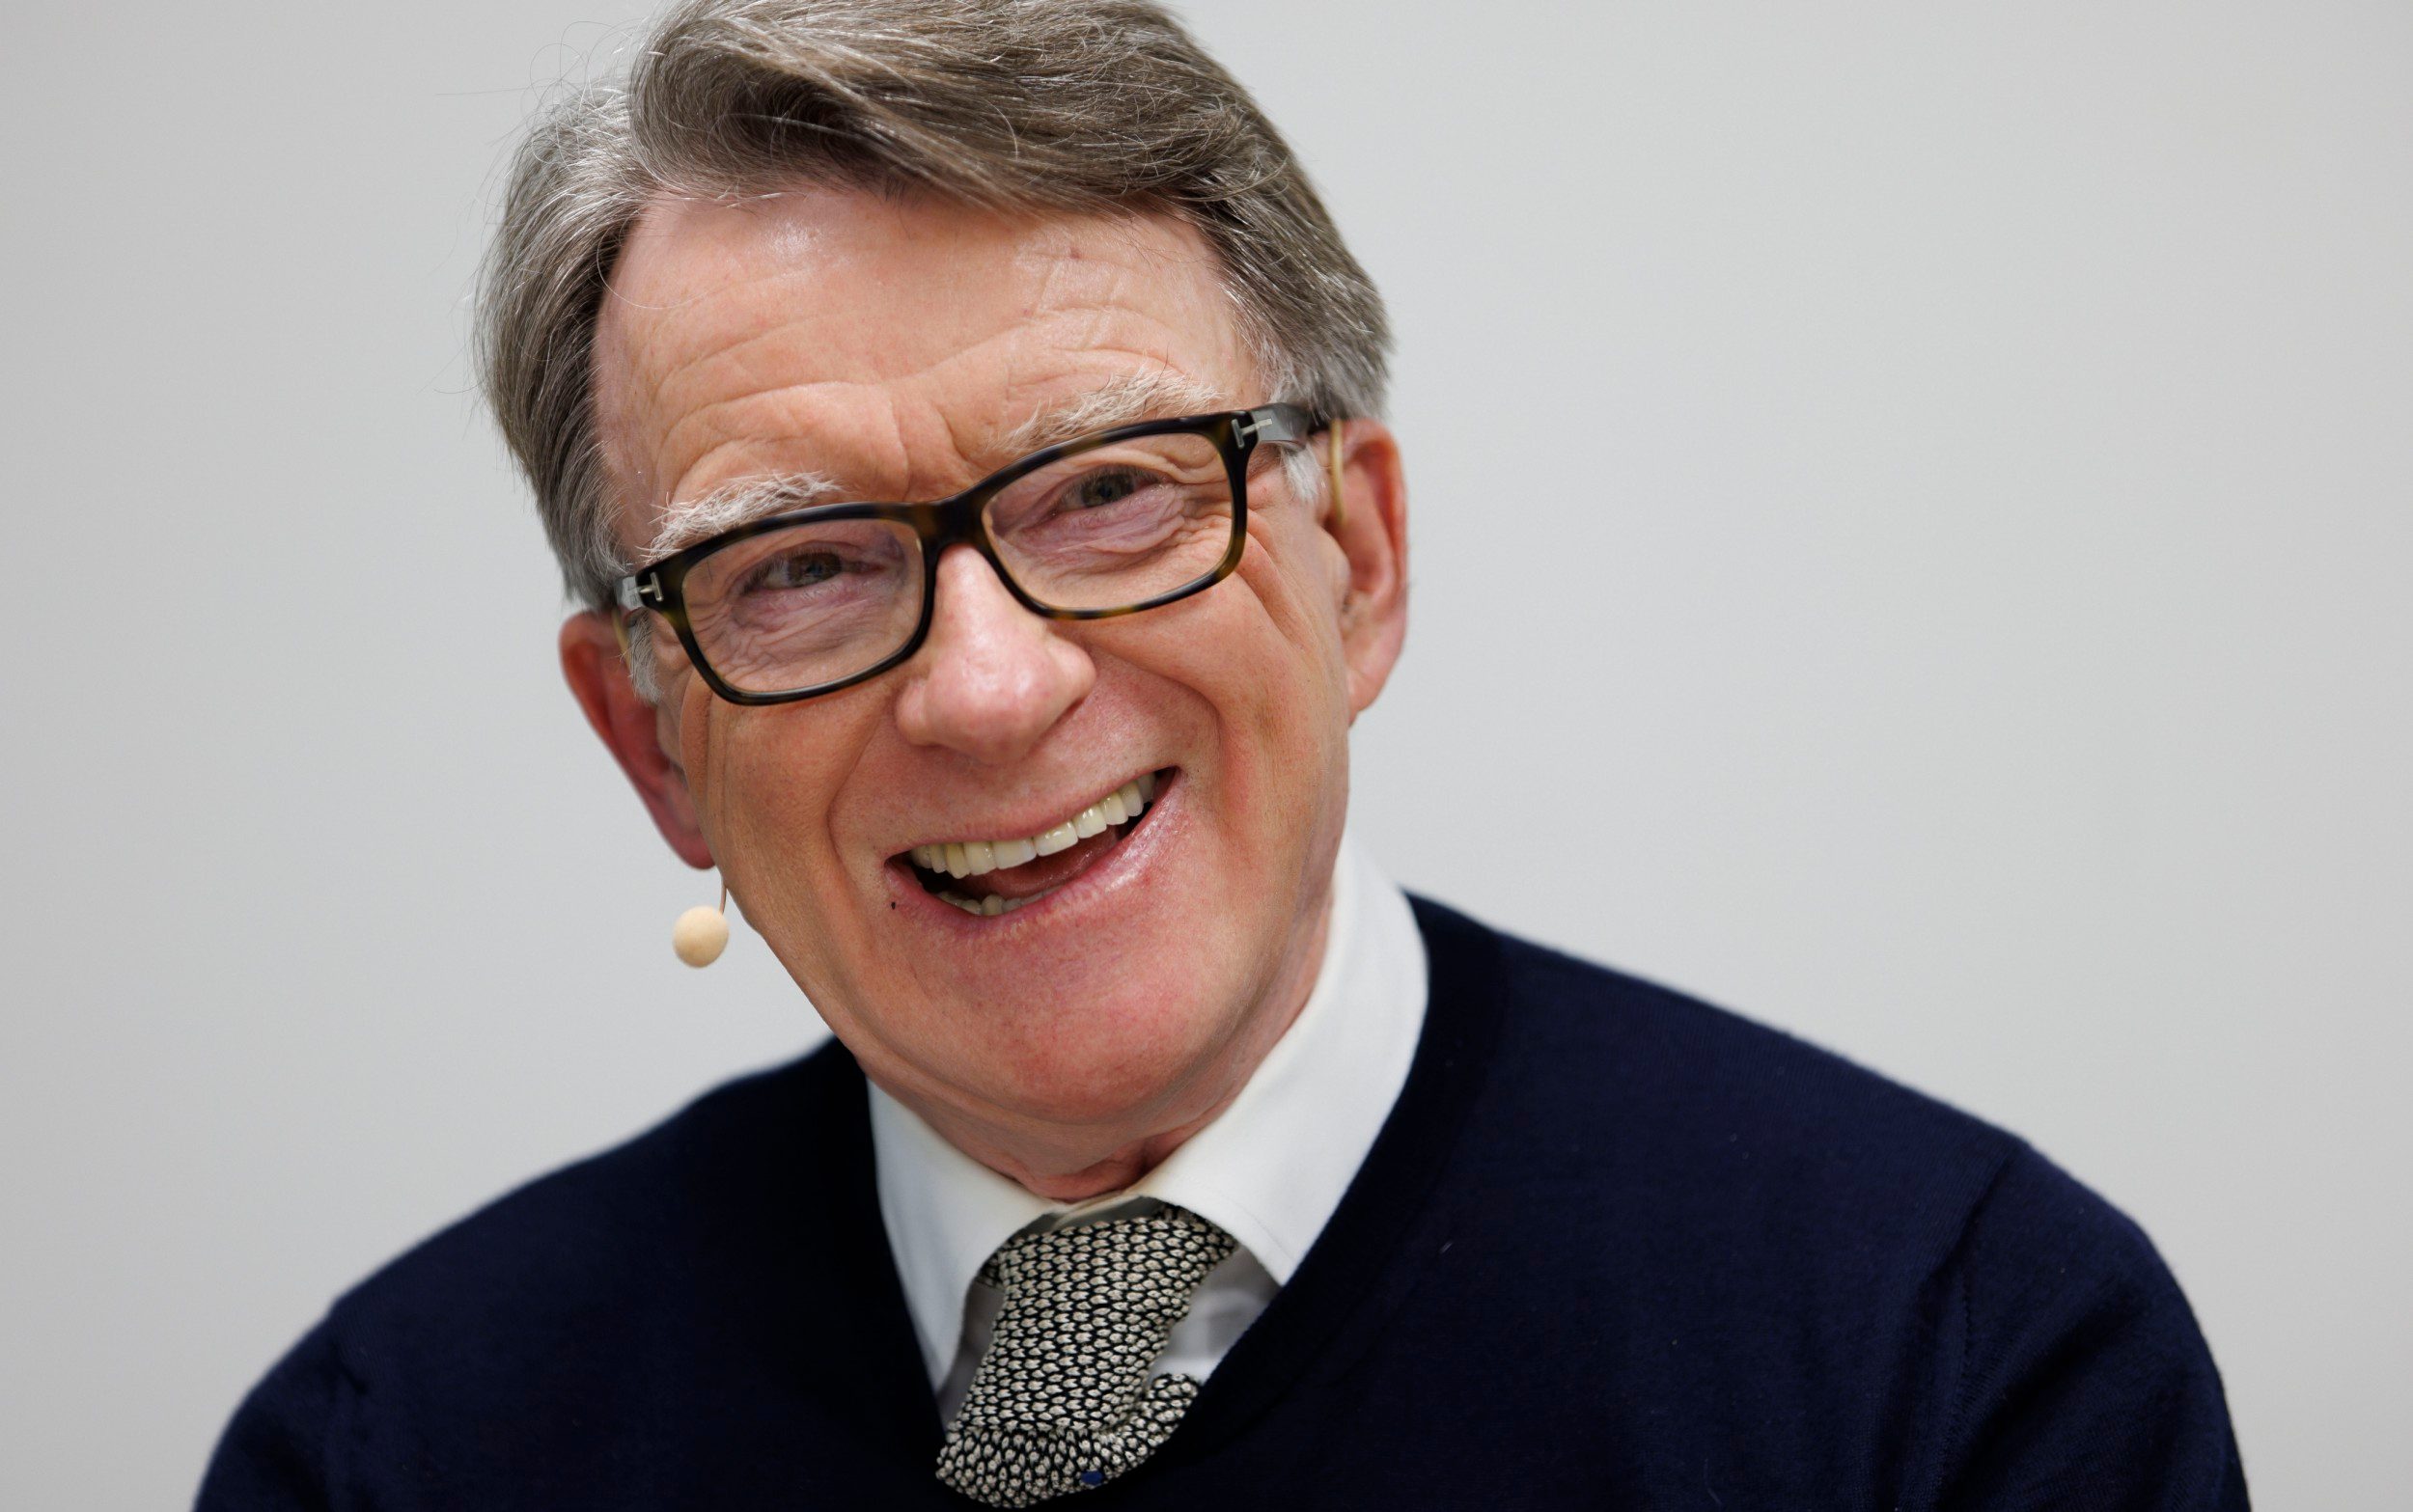 lord mandelson nets £10m windfall in deal with former obama aide